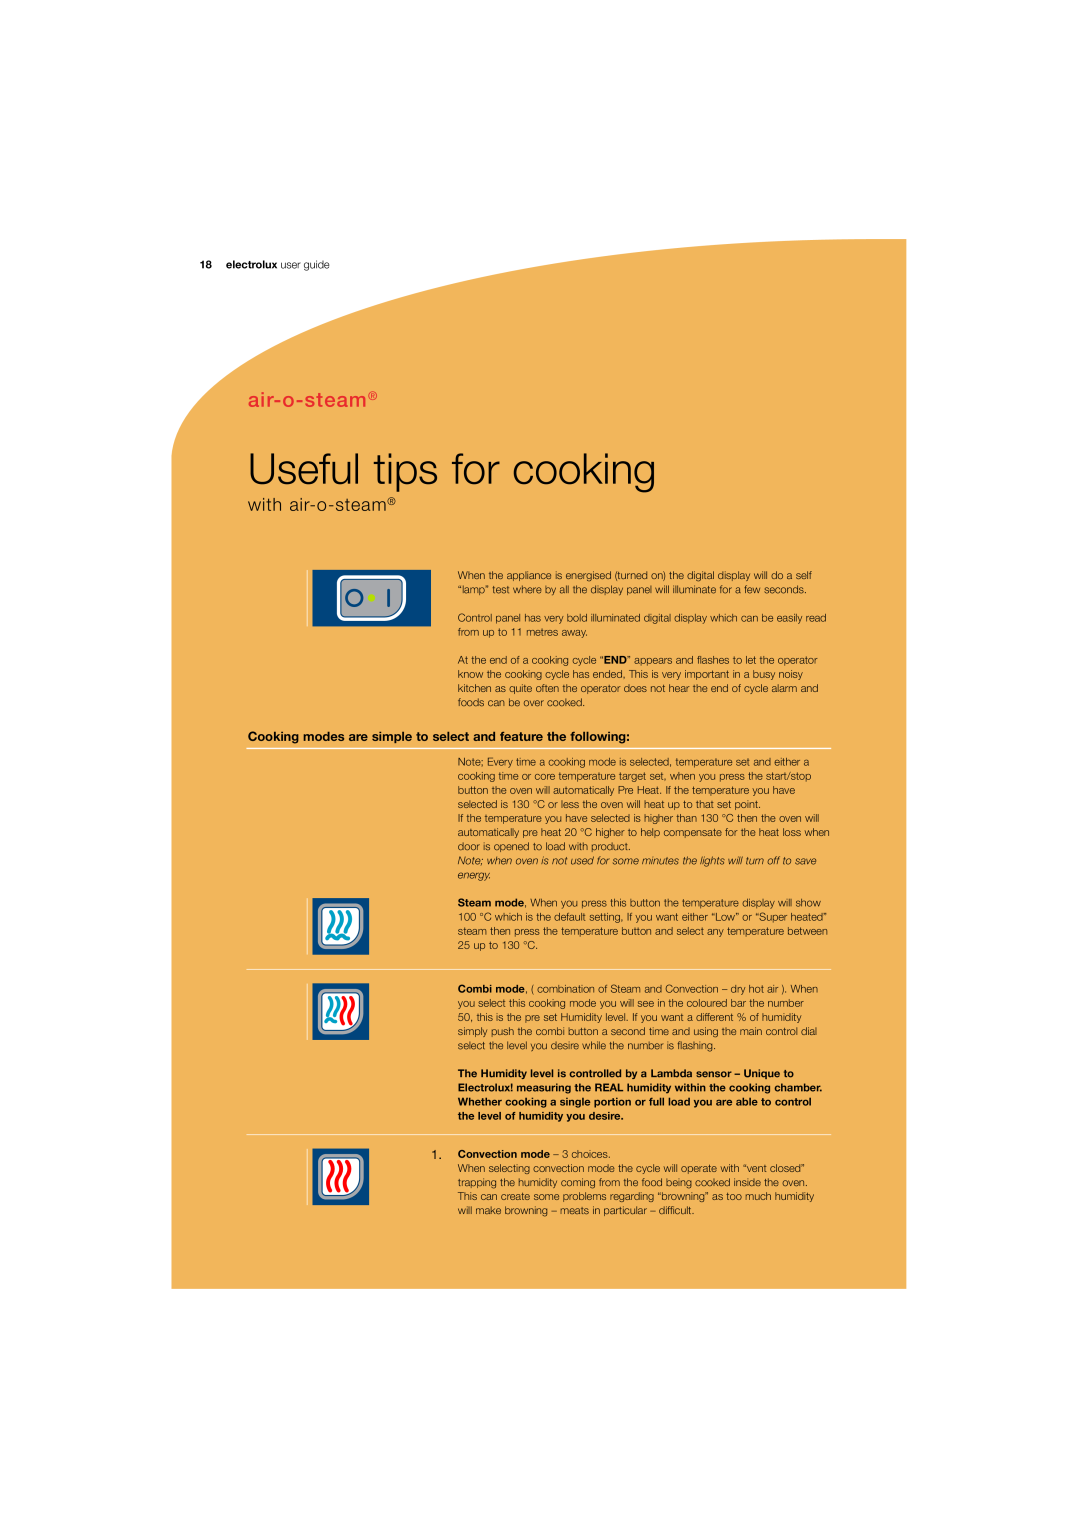 Electrolux 180 manual Useful tips for cooking, with air-o-steam, electrolux user guide, Convection mode - 3 choices 